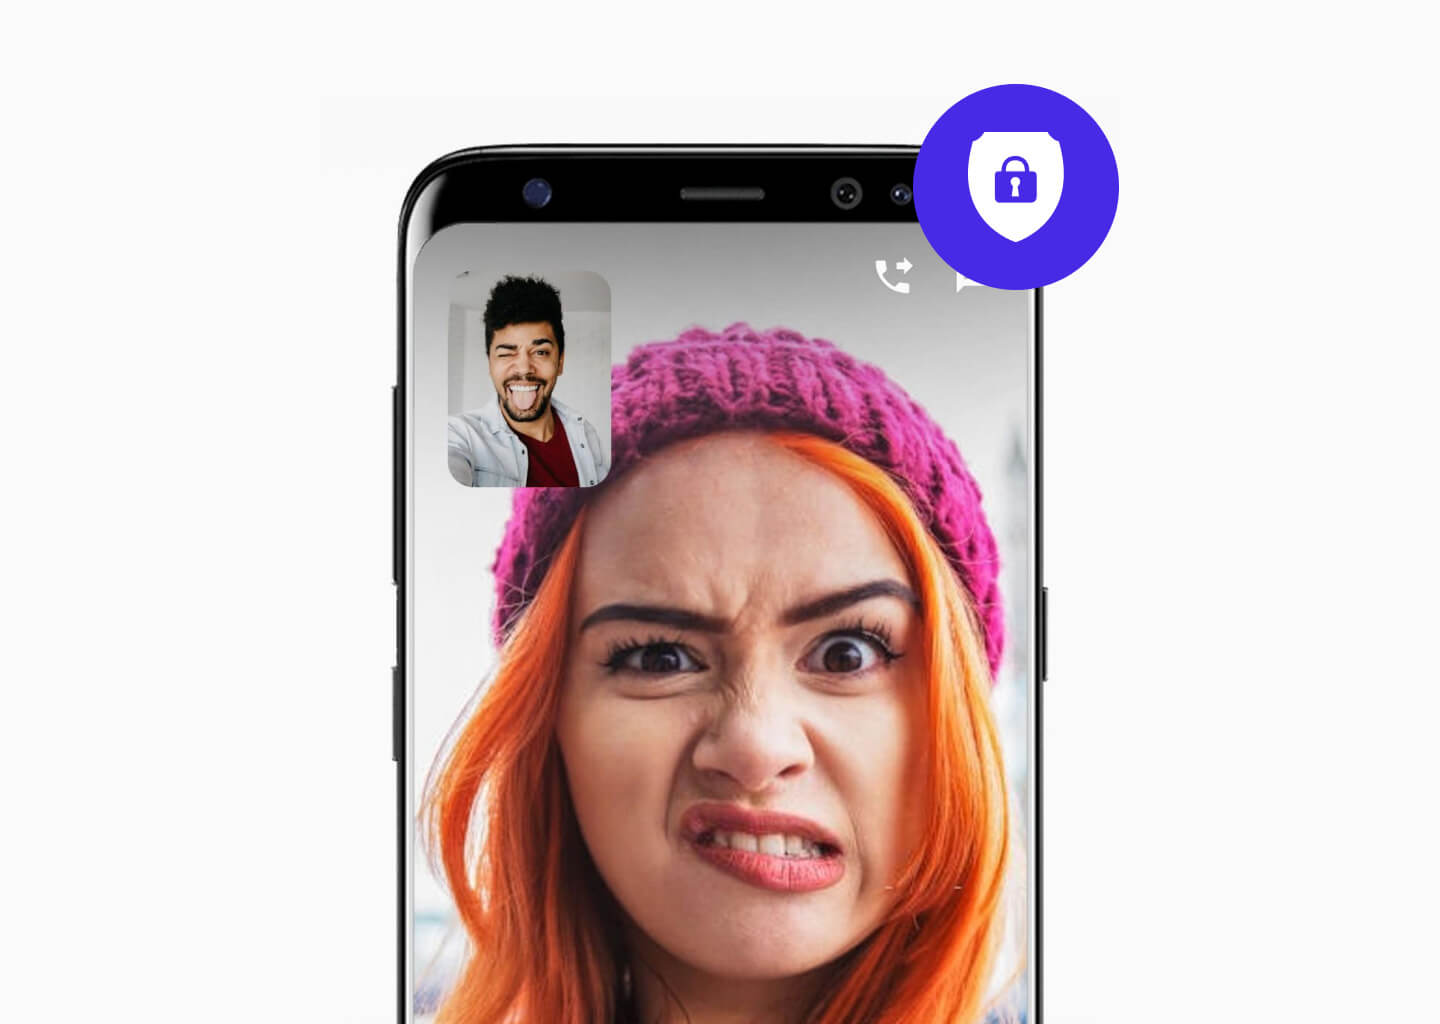 Security for video call and voice chat apps